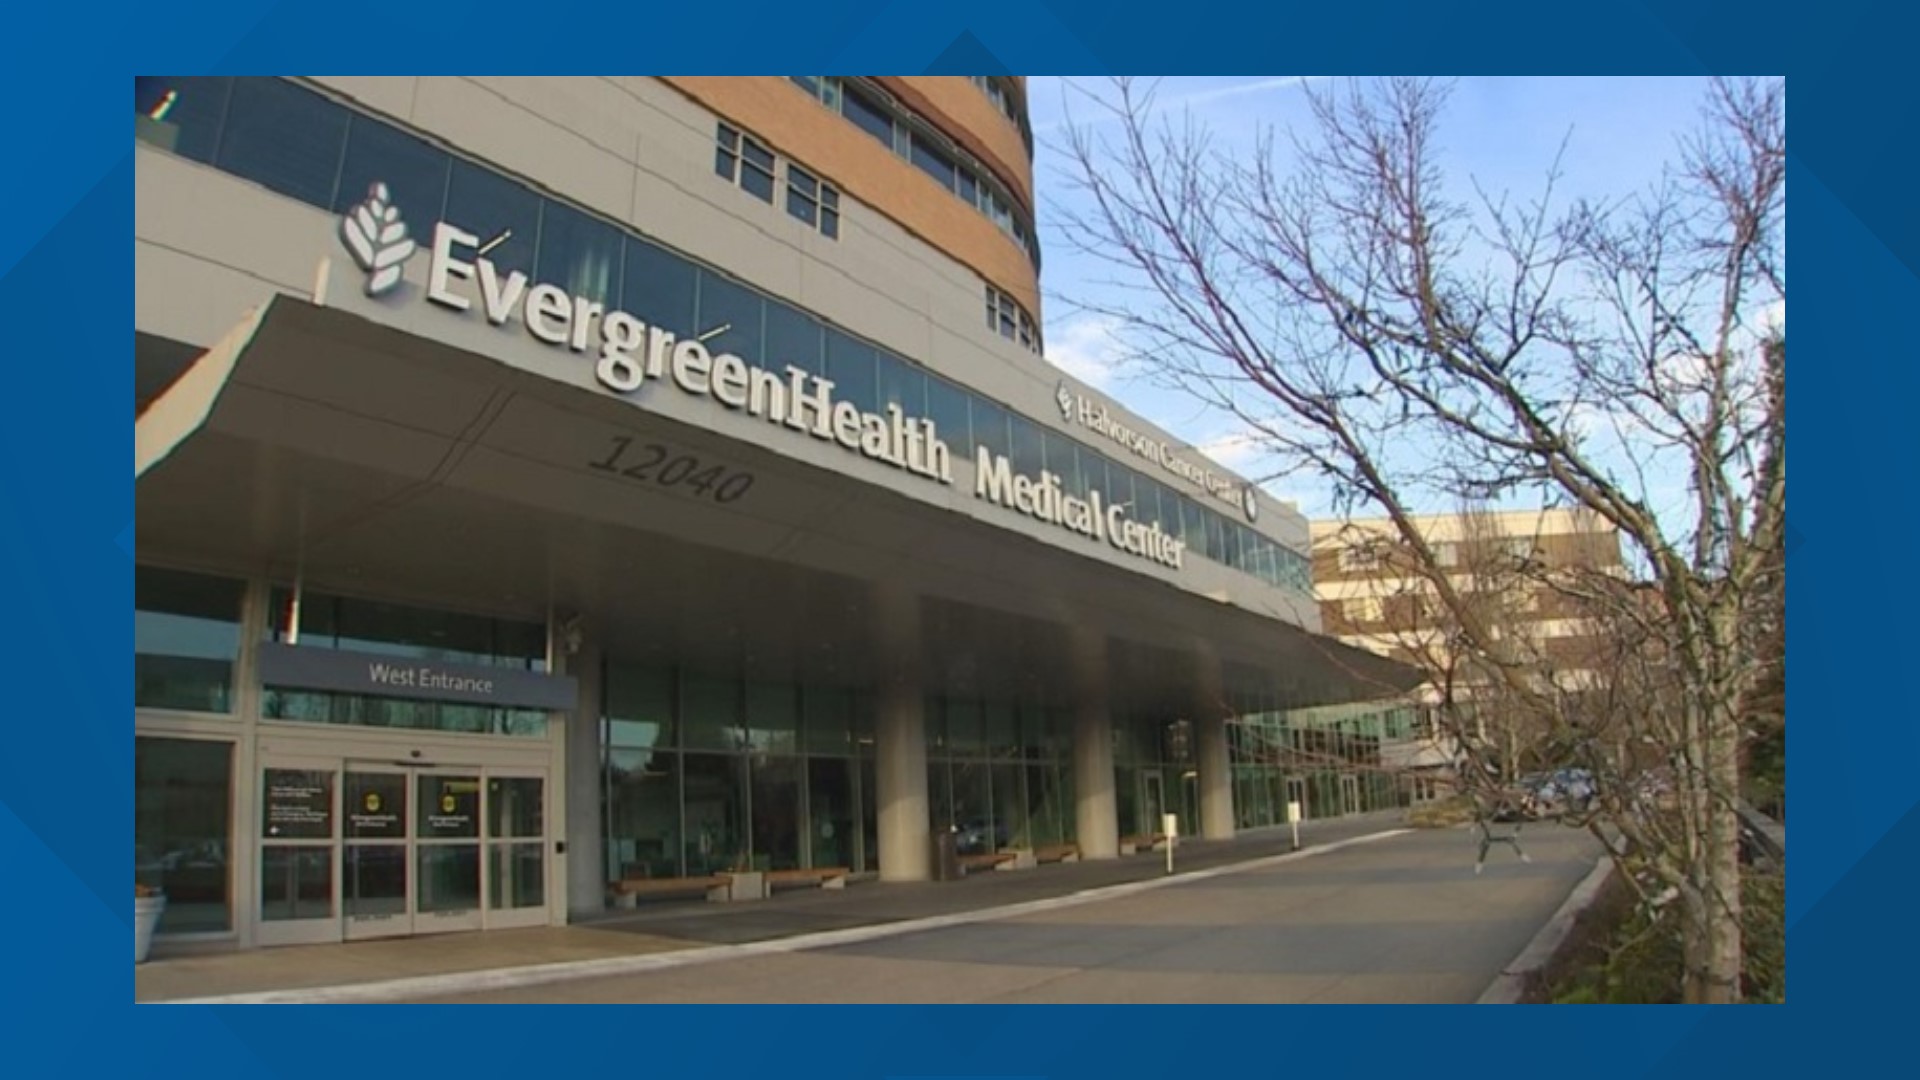 The man who died was a patient at EvergreenHealth in Kirkland. He was admitted with serious respiratory issues and tested positive for the virus. He was in his 50s.